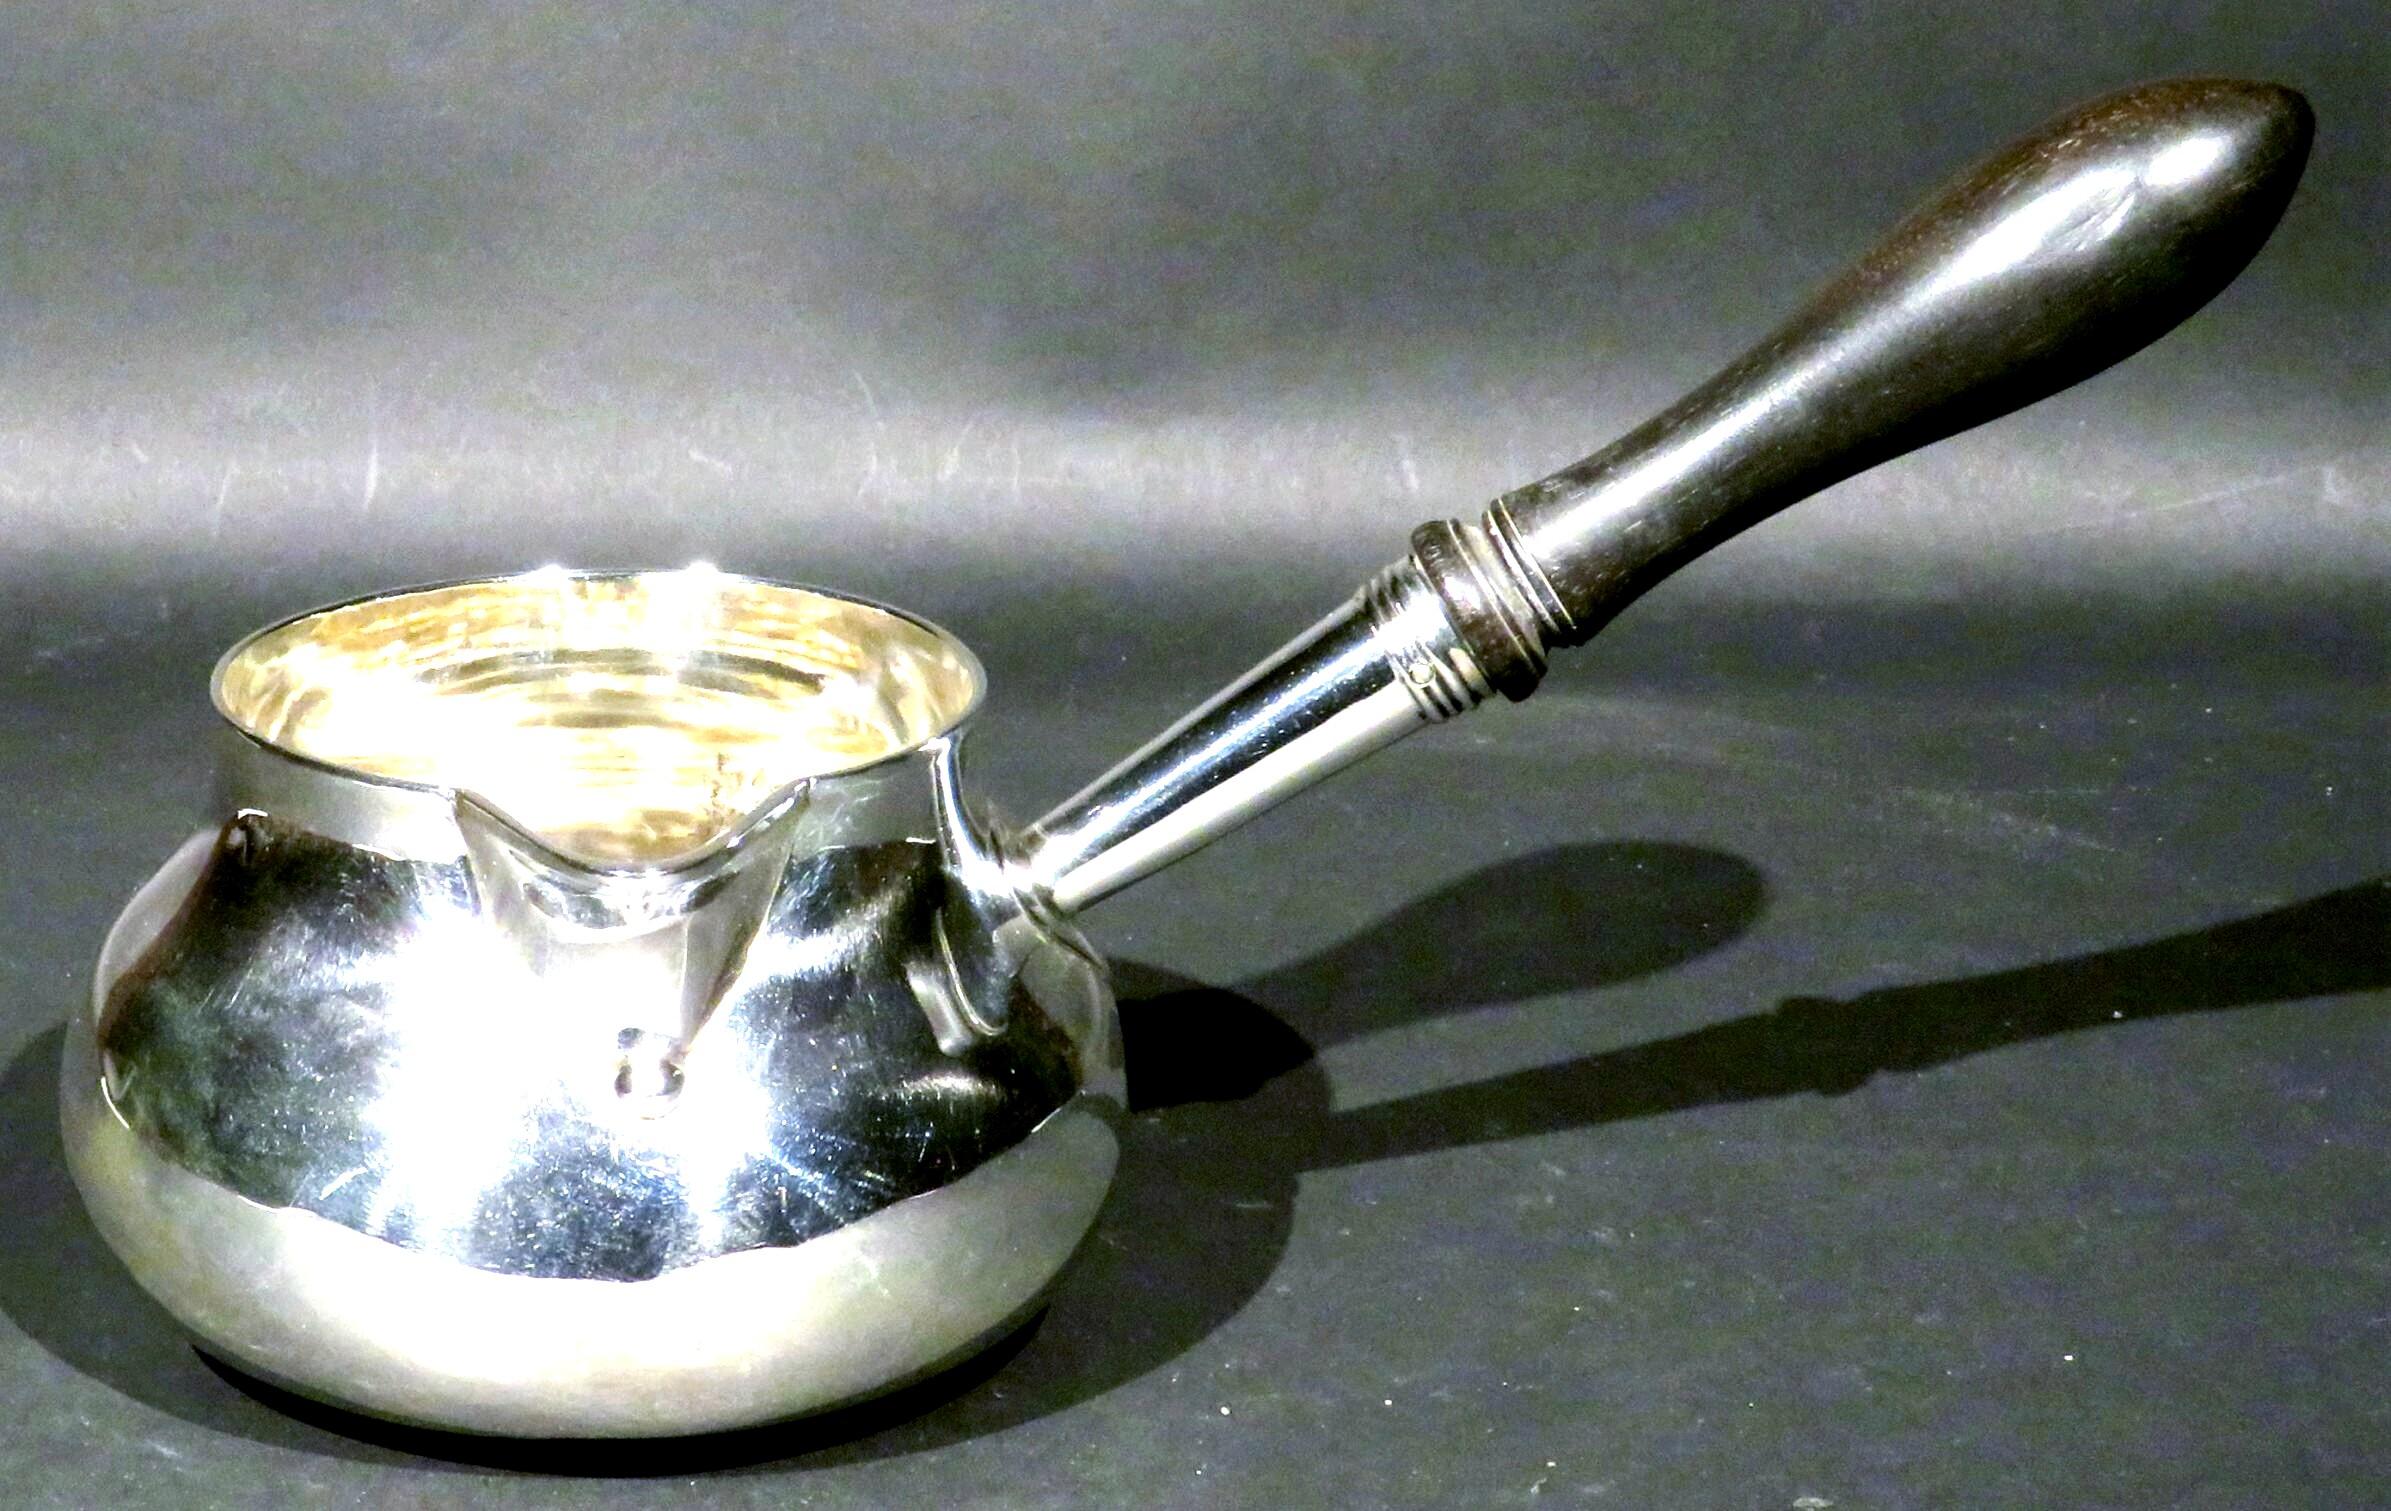 An exceptional Georgian sterling silver brandy warmer of fine & large proportions and in extremely good overall condition, by one of the most important & oldest British silversmith firms dating back to 1680.
The large sterling bowl of compressed